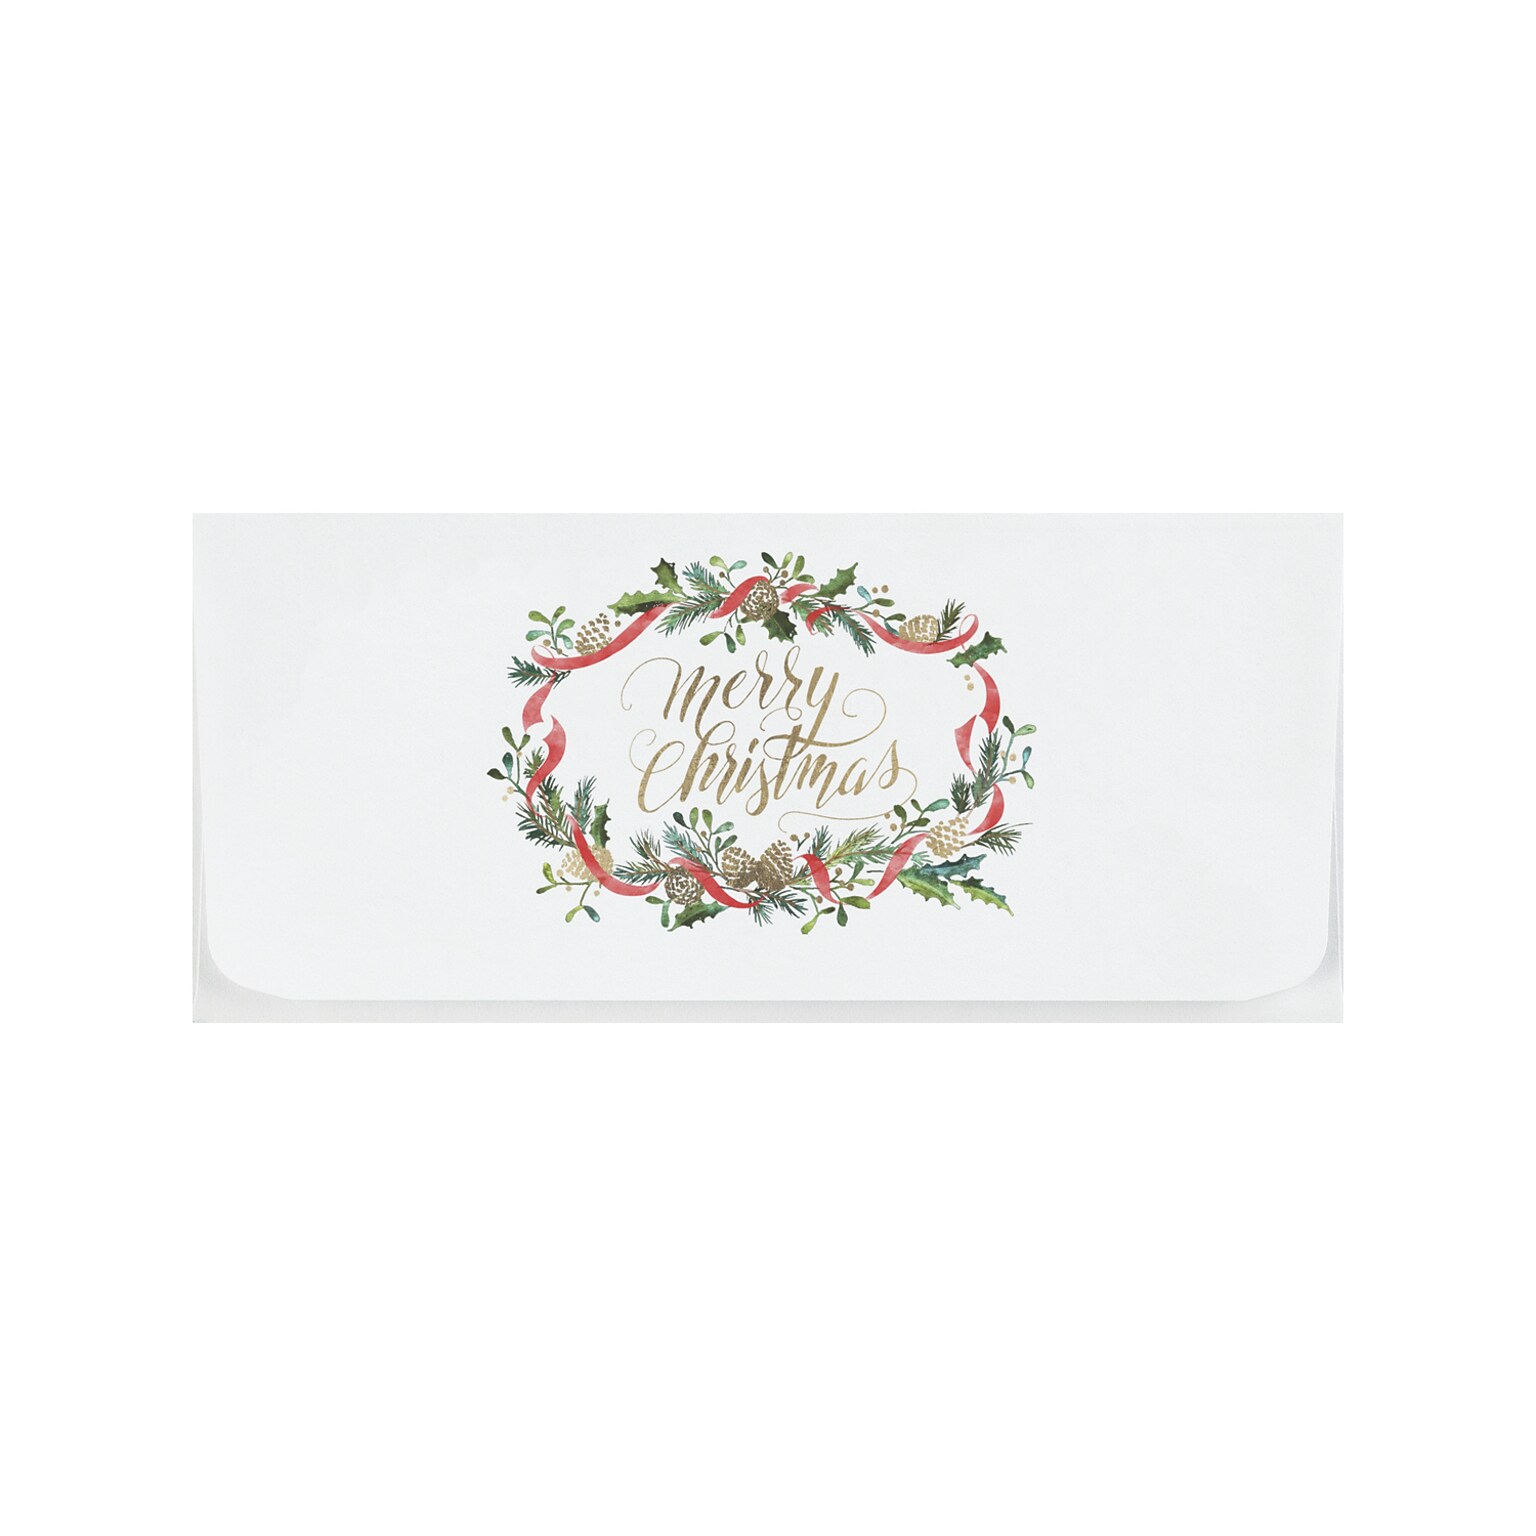 Custom 6-1/2 x 2-7/8 Merry Christmas Wreath Currency Envelopes, Printed, Smooth, 25/Pack